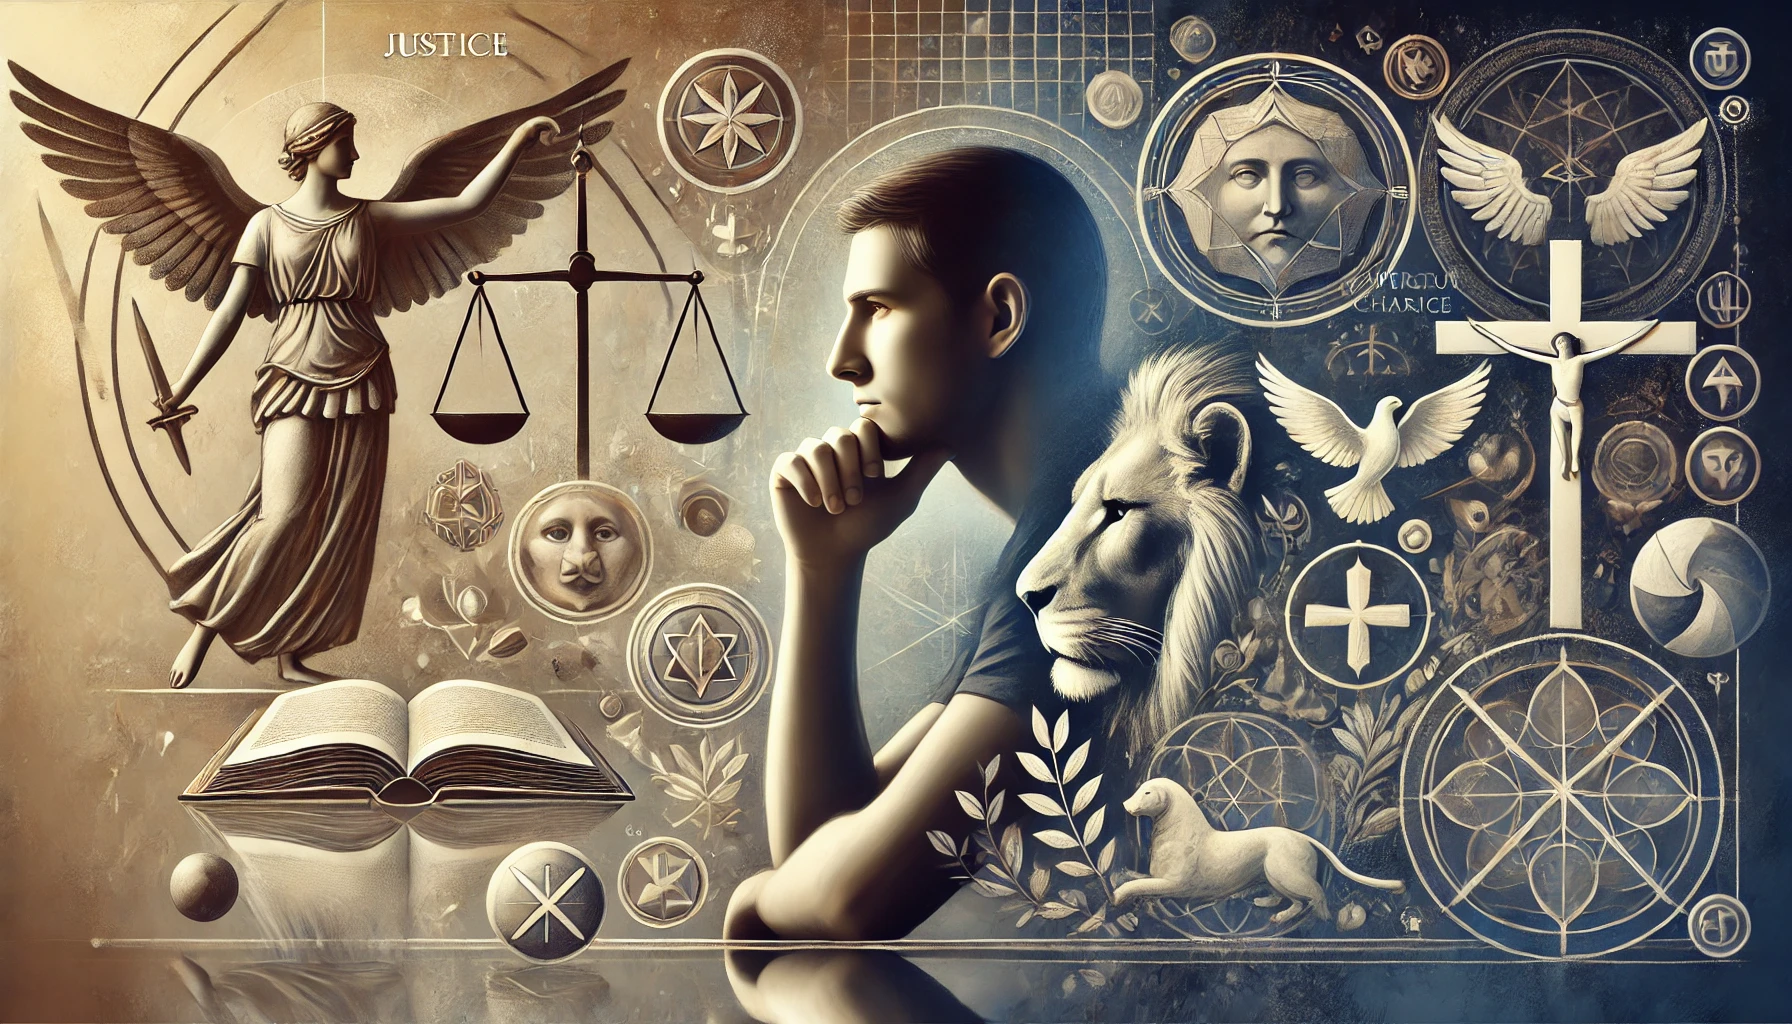 Modern individual reflecting amidst a serene background with symbols of Stoic and Christian virtues, including scales, a book, a lion, a chalice, a cross, a heart, and a dove.